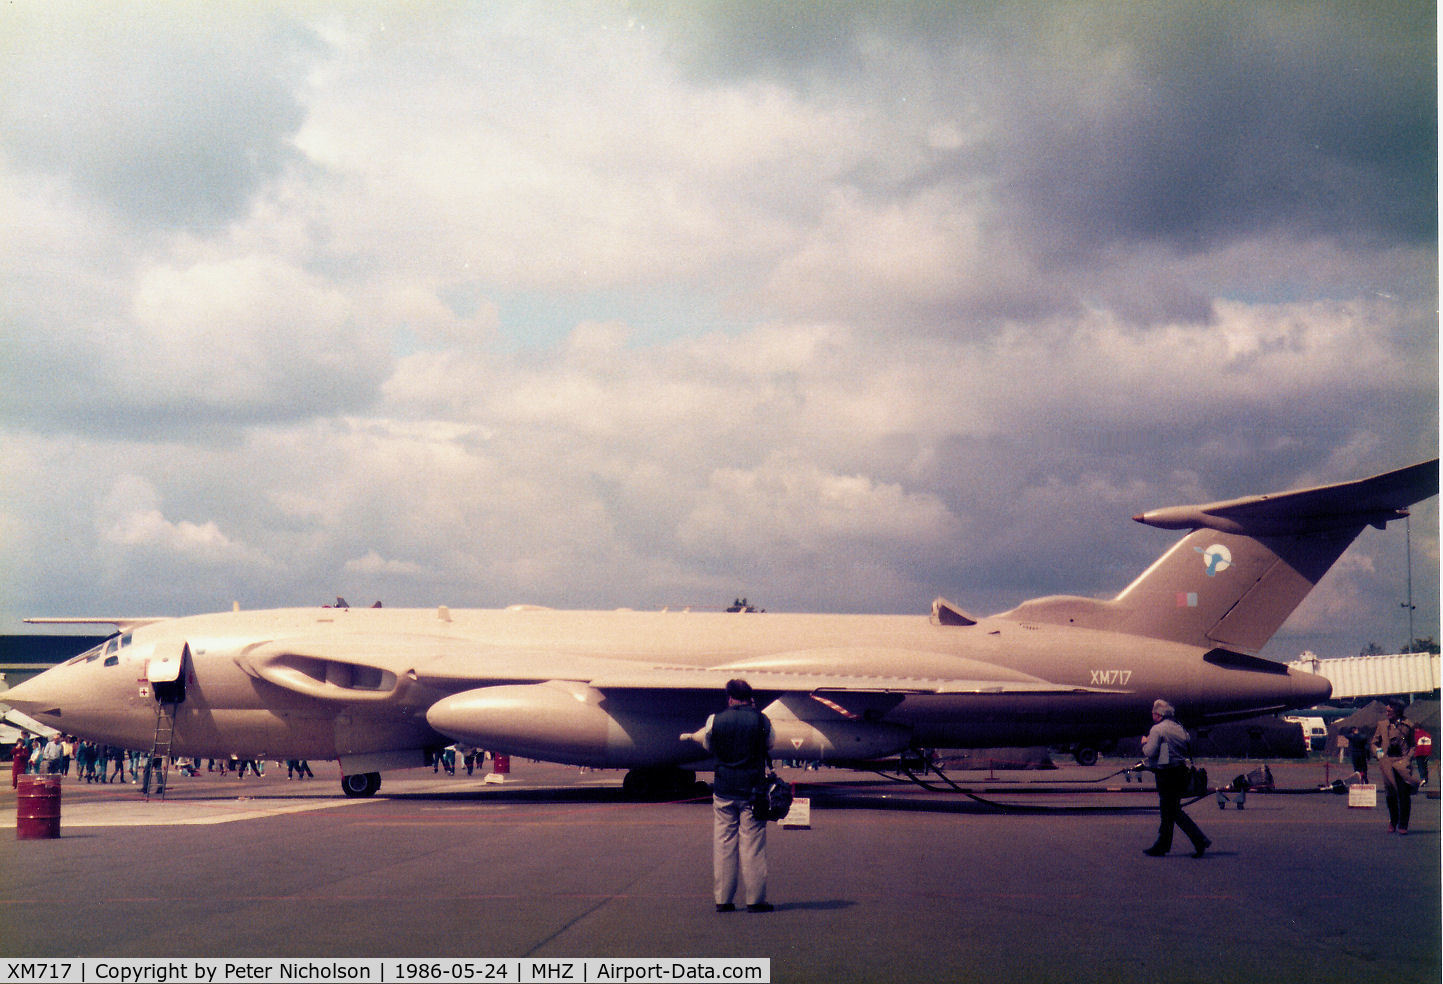 XM717, 1963 Handley Page Victor K.2 C/N HP80/85, Victor K.2 of 55 Squadron at RAF Marham on display at the 1986 RAF Mildenhall Air Fete.